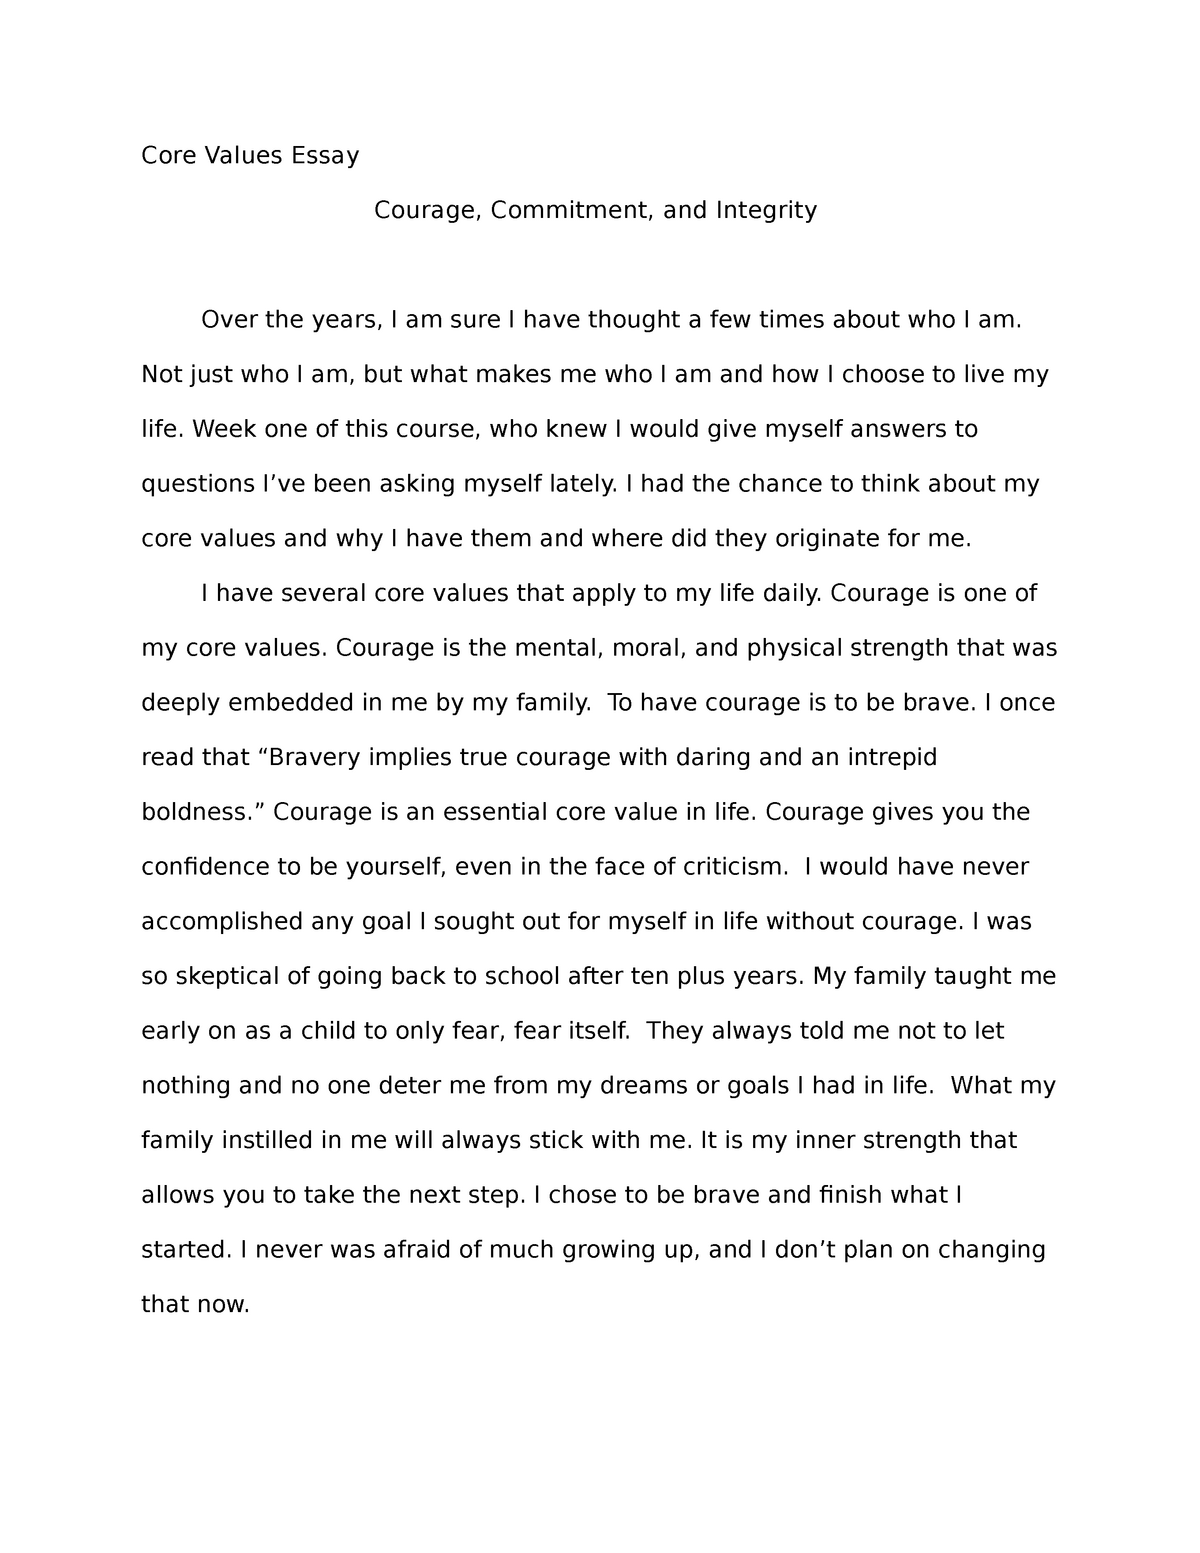 how to write an essay about your core values